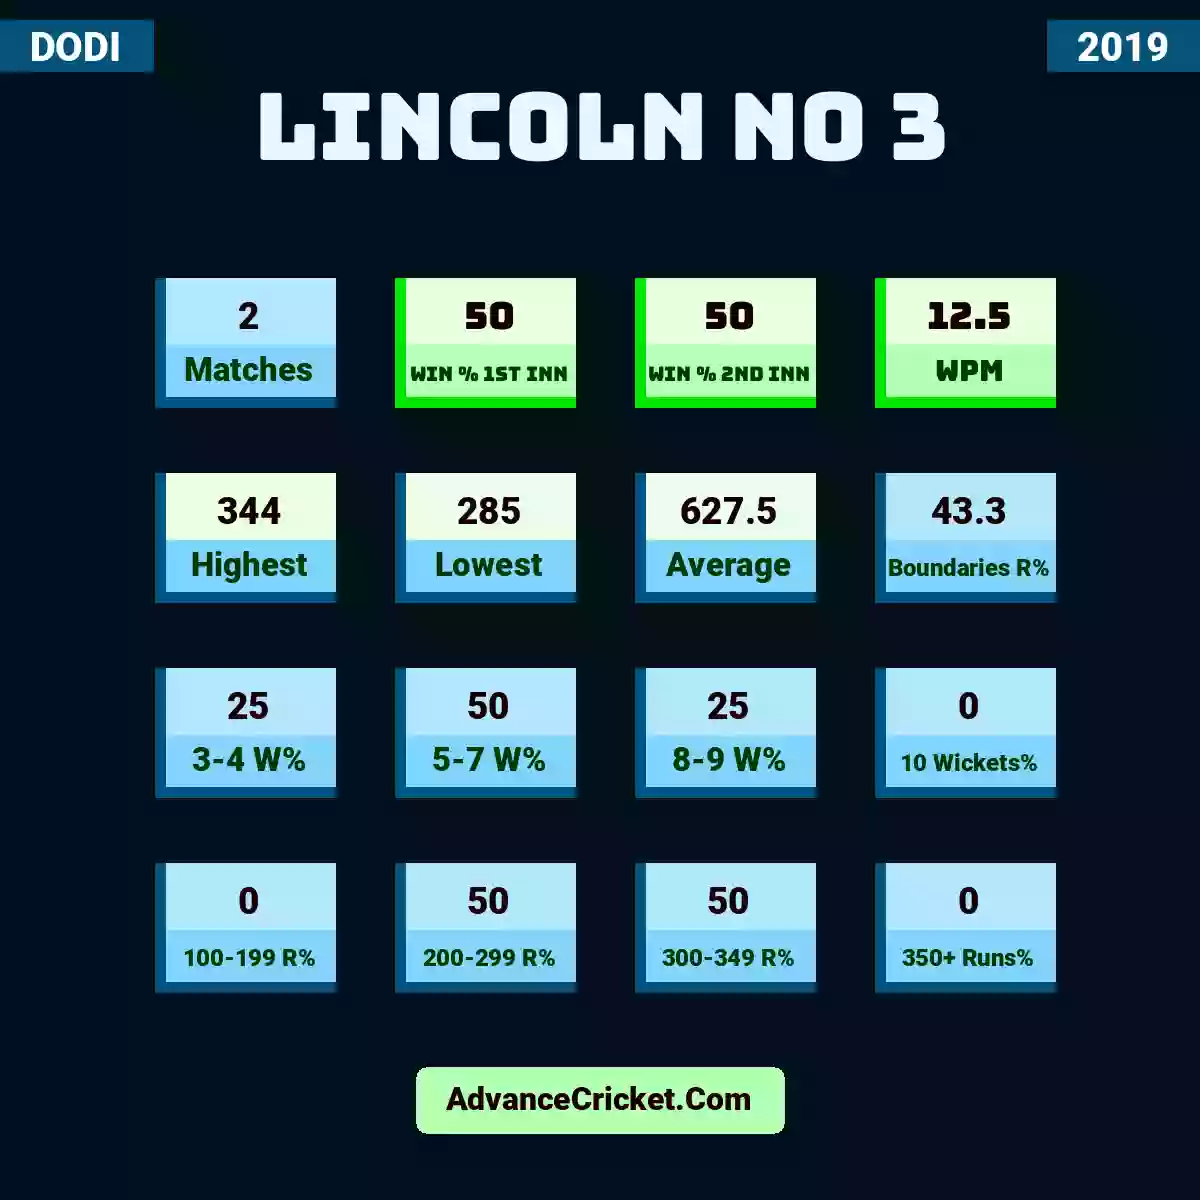 Image showing Lincoln No 3 with Matches: 2, Win % 1st Inn: 50, Win % 2nd Inn: 50, WPM: 12.5, Highest: 344, Lowest: 285, Average: 627.5, Boundaries R%: 43.3, 3-4 W%: 25, 5-7 W%: 50, 8-9 W%: 25, 10 Wickets%: 0, 100-199 R%: 0, 200-299 R%: 50, 300-349 R%: 50, 350+ Runs%: 0.